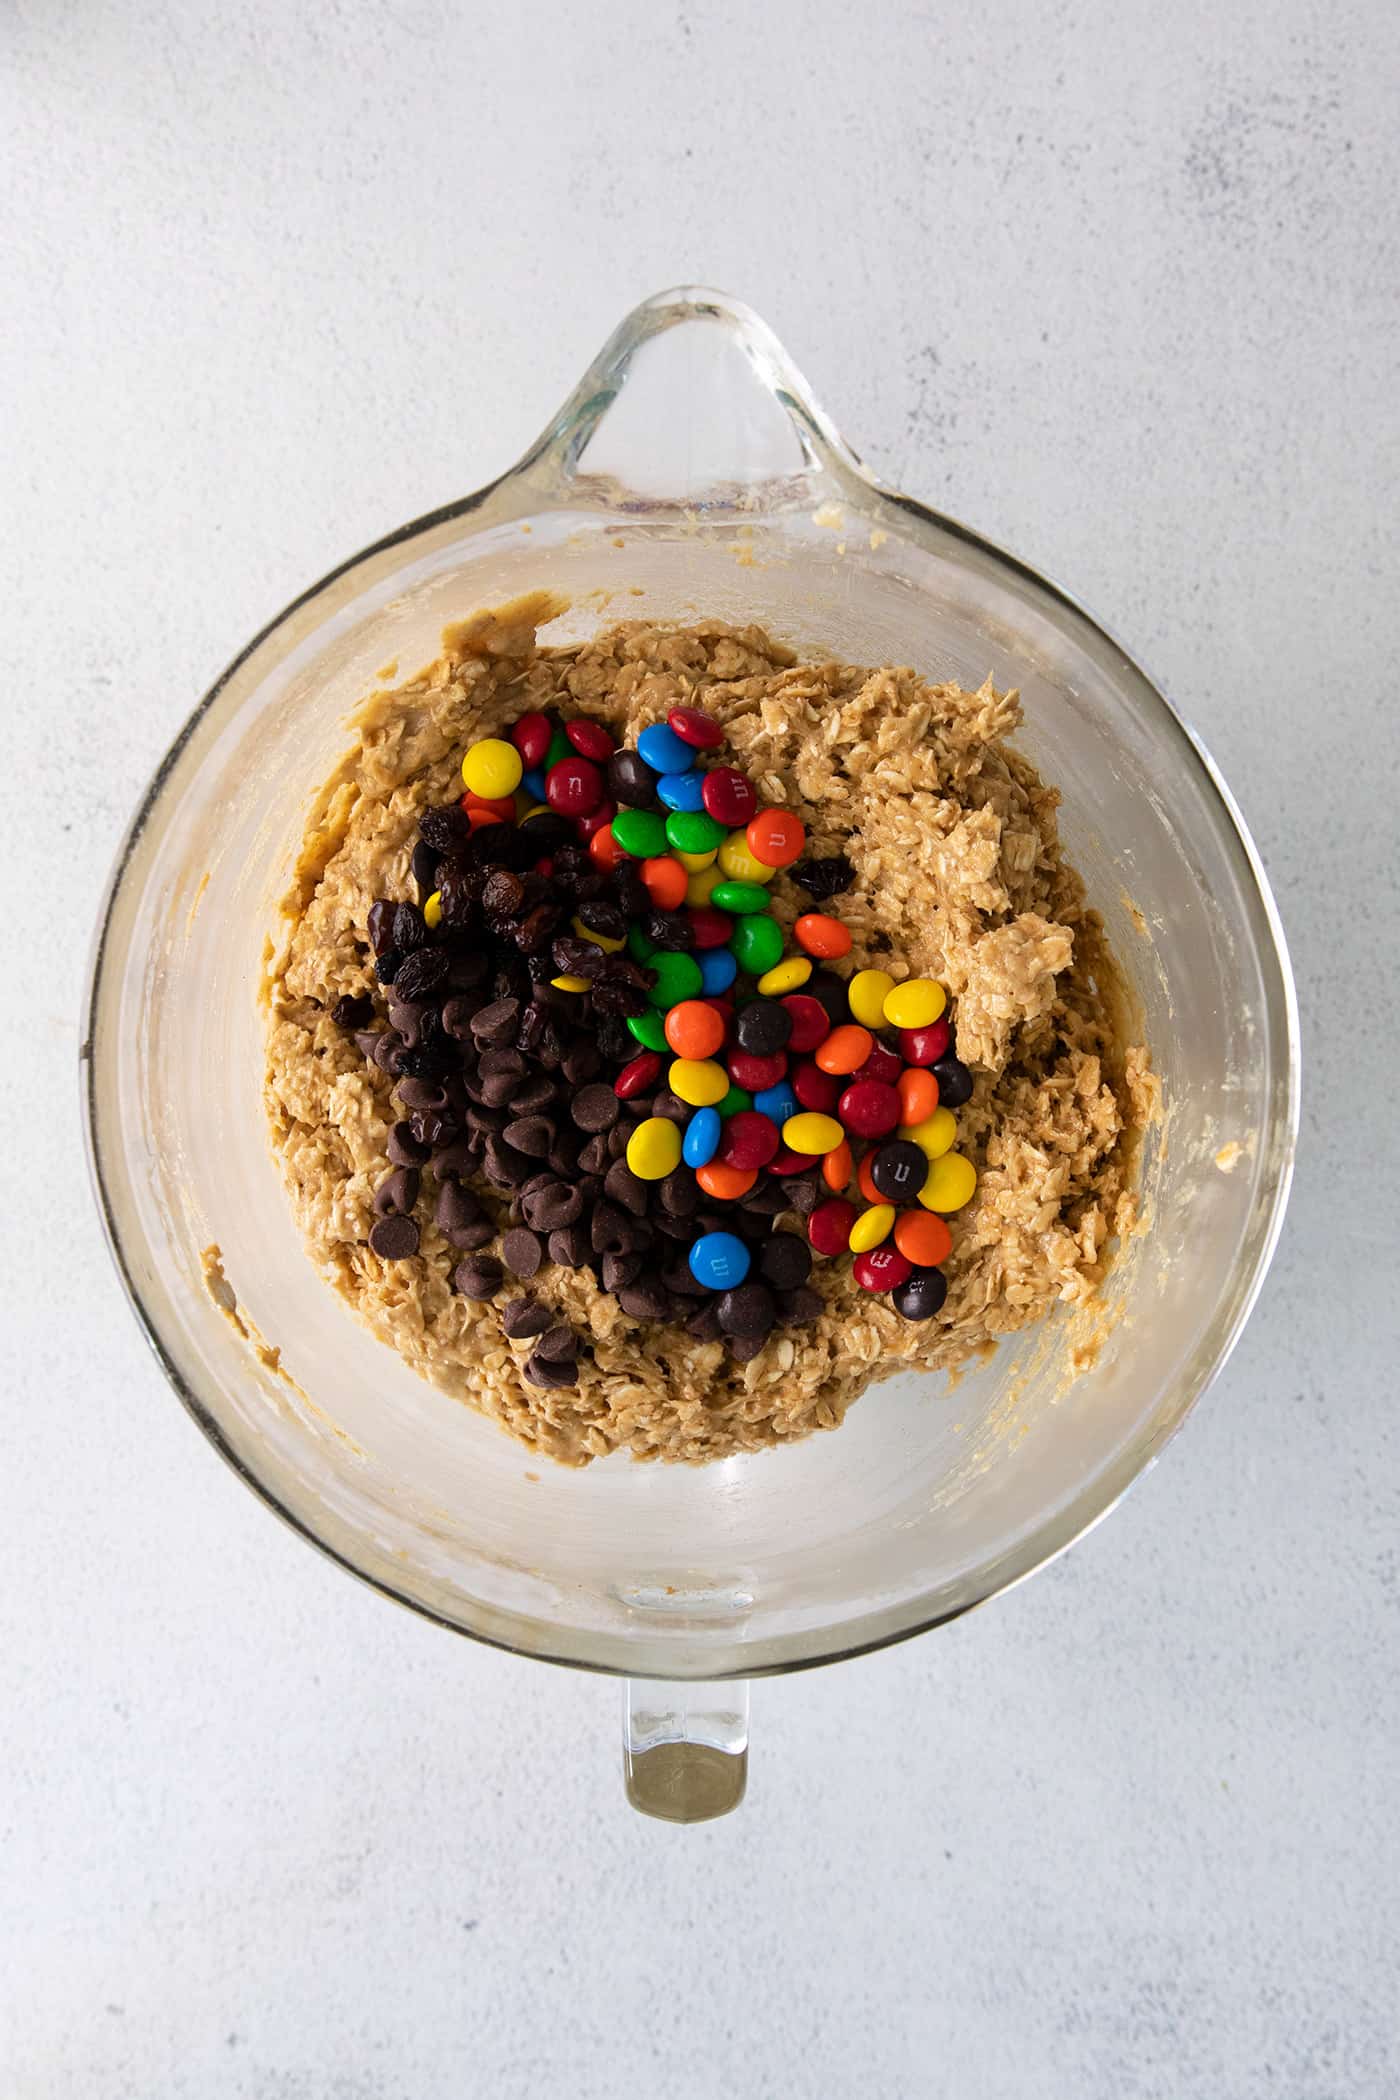 Cookie dough with M&Ms, chocolate chips, and raisins